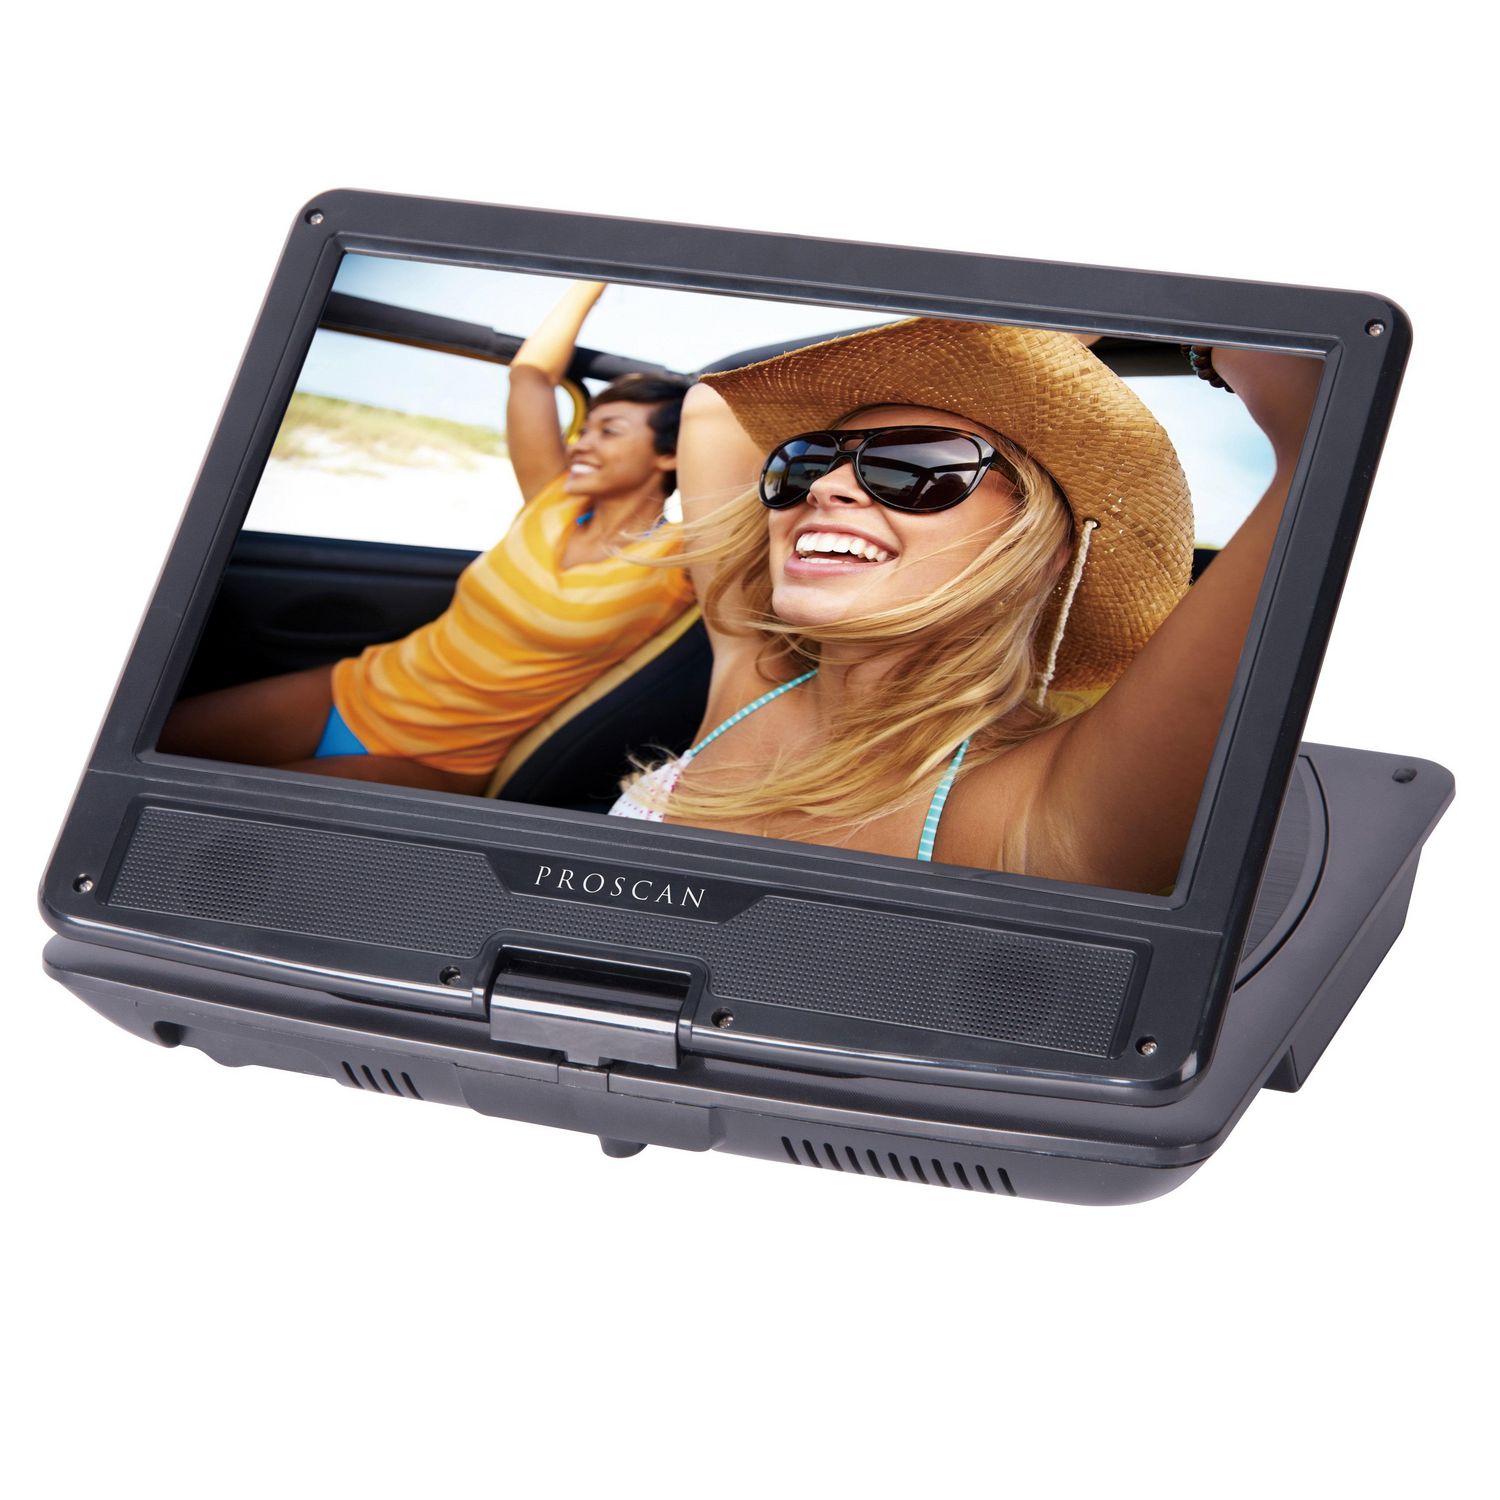 Proscan 10-in Portable DVD Player - Black, Screen swivels up to